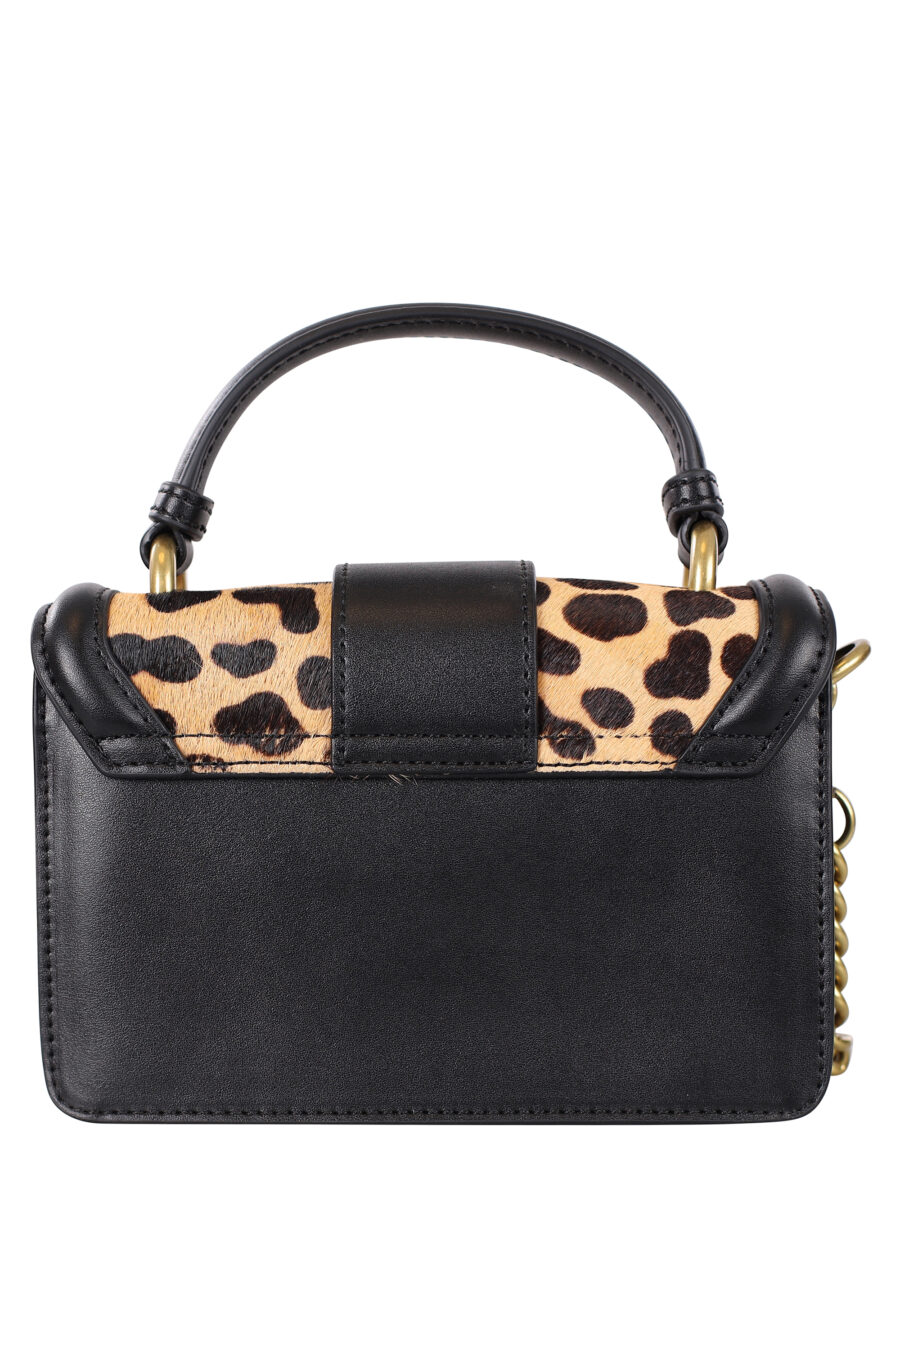 Leopard print bag with baroque buckle - IMG 0494